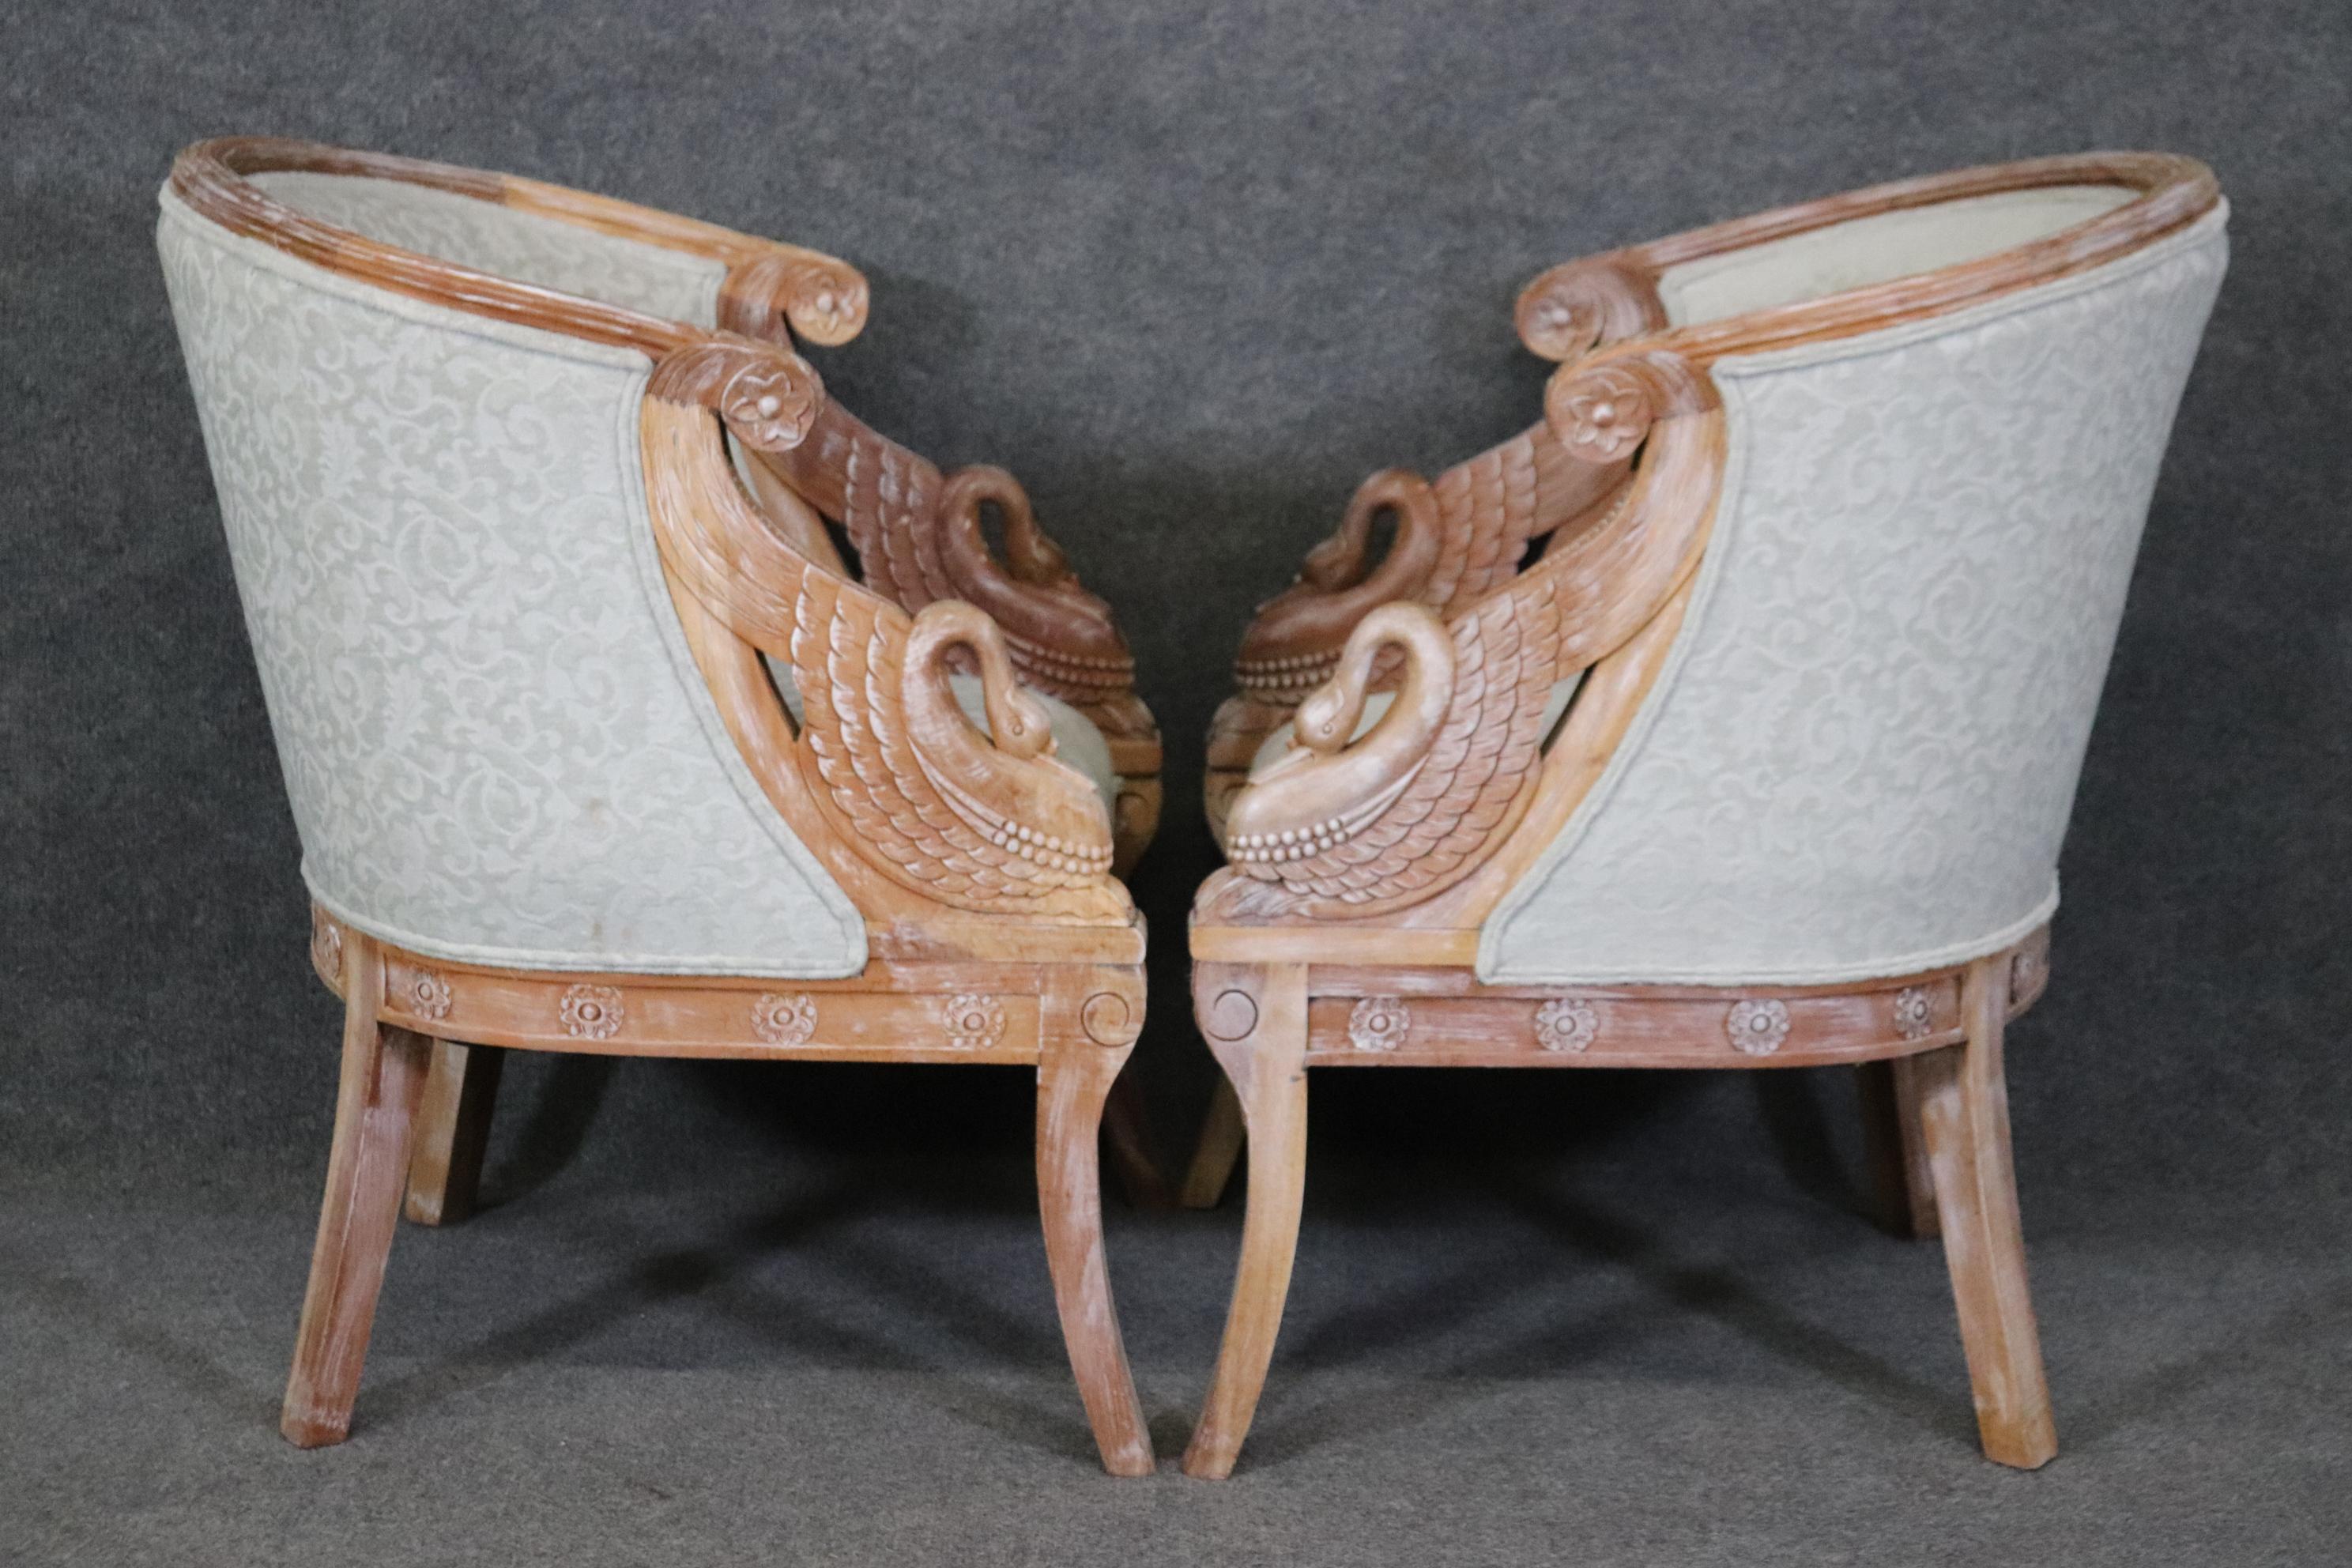 These are beautifully done chairs with a splash fo white wash and some natural walnut showing through. The upholstery is vintage so expect stains as shown in the photos. If you want new chairs, there are other sites for that. The chairs are